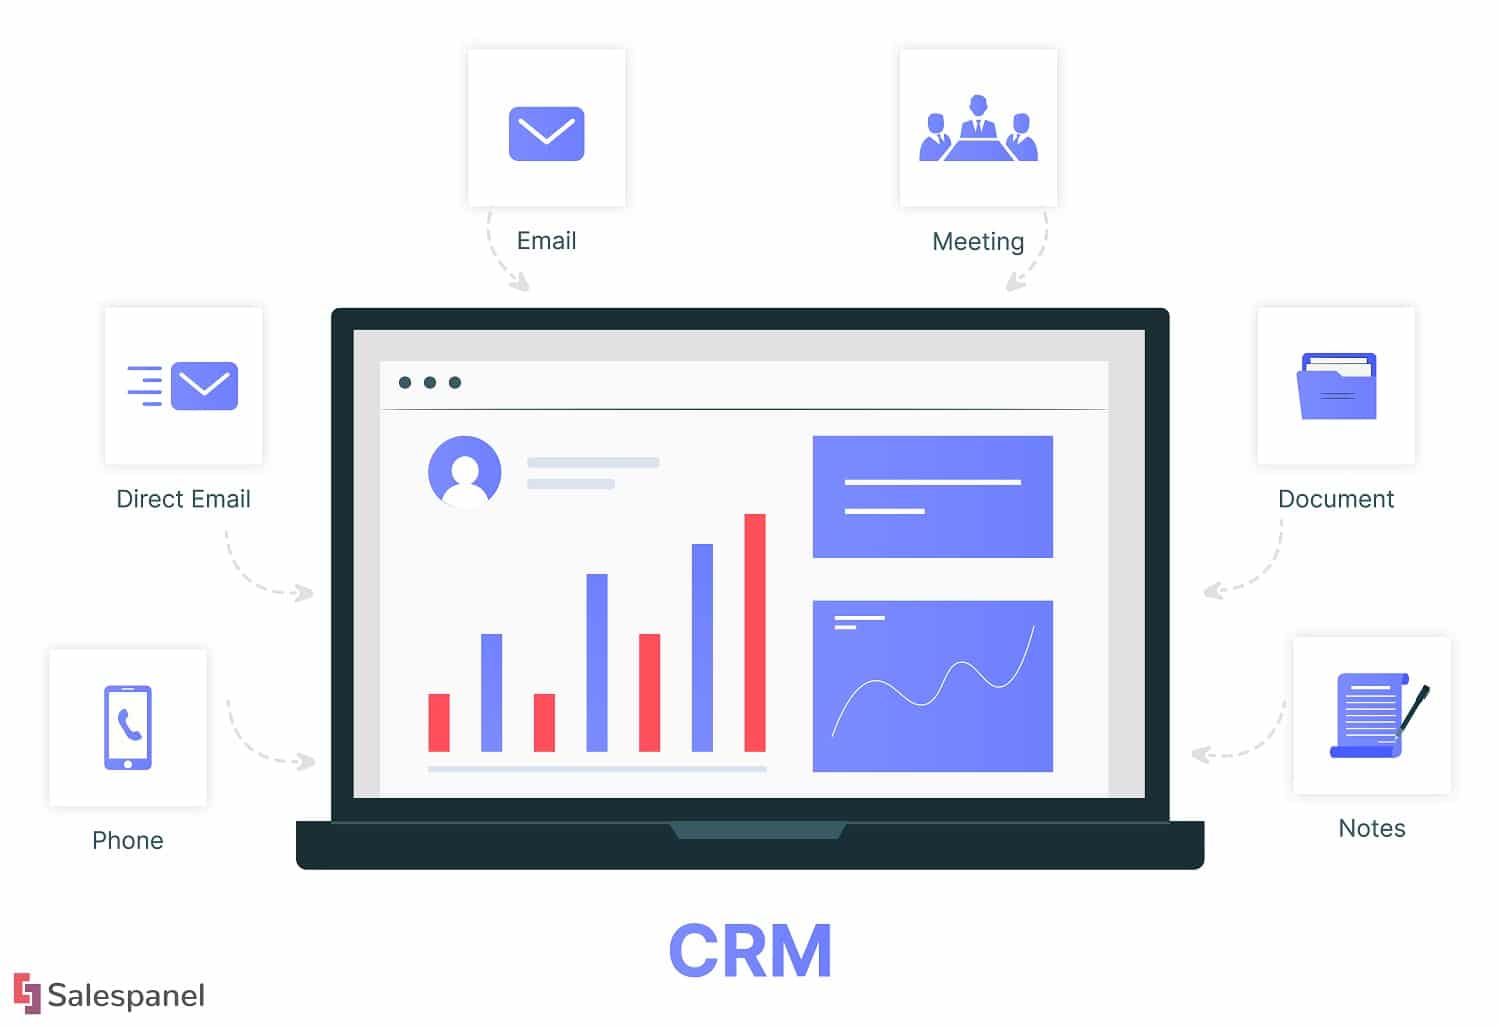 8 CRM Modules (sorted by Categories) That Work With Any CRM